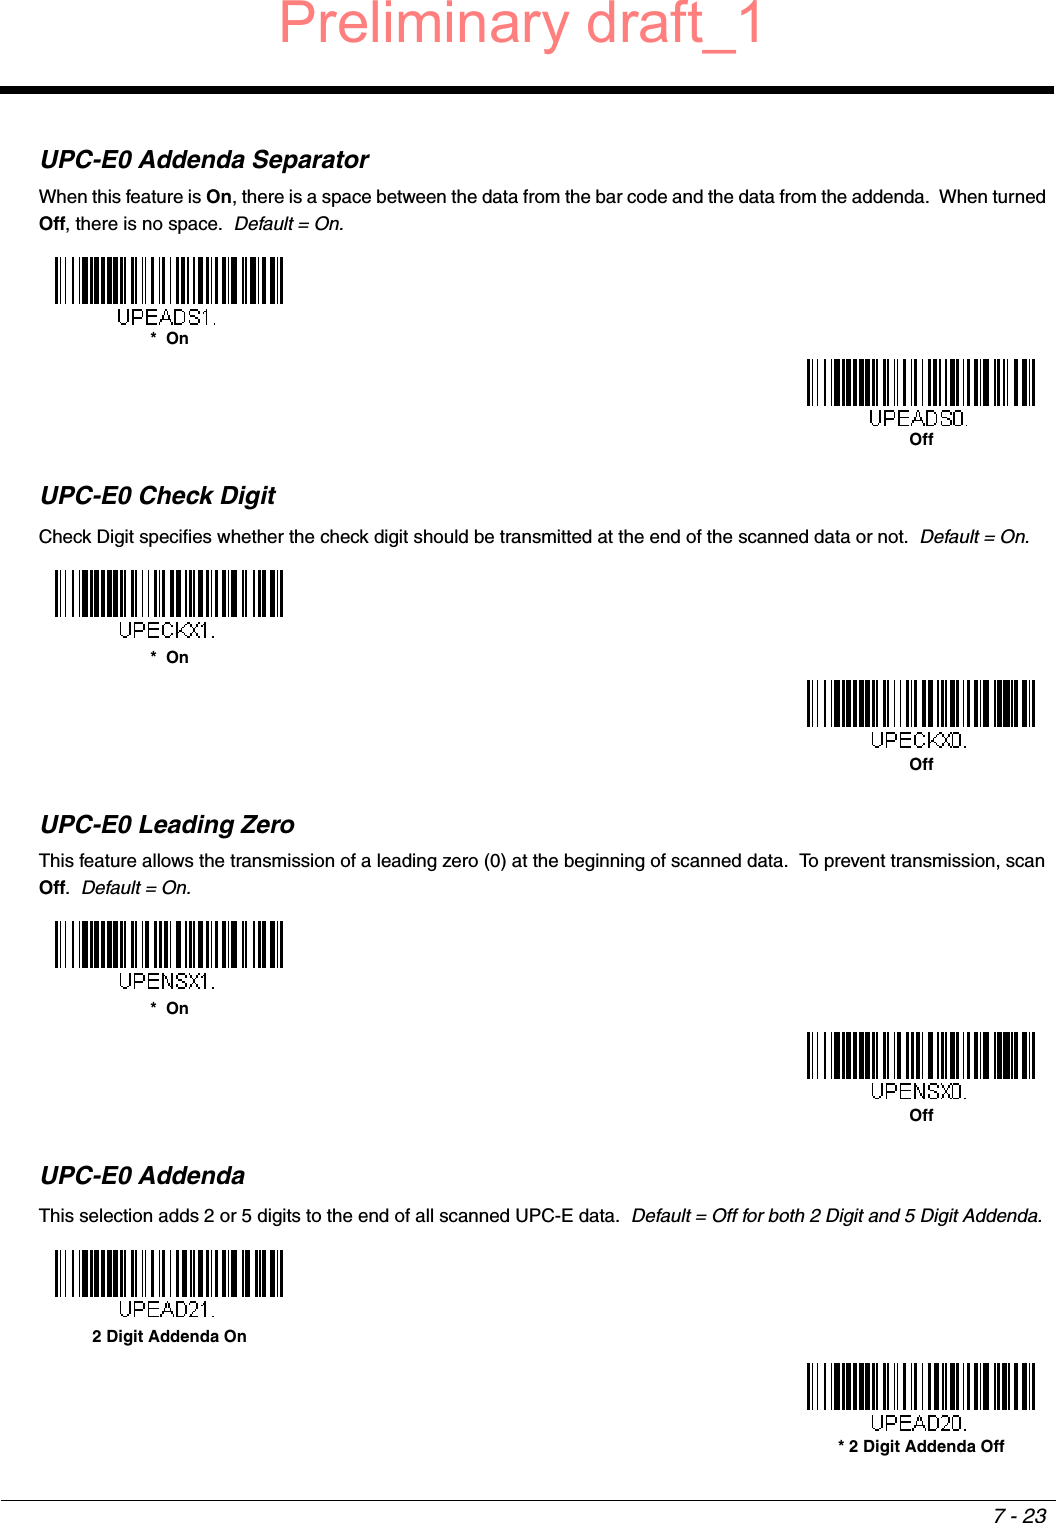 7 - 23UPC-E0 Addenda SeparatorWhen this feature is On, there is a space between the data from the bar code and the data from the addenda.  When turned Off, there is no space.  Default = On.UPC-E0 Check DigitCheck Digit specifies whether the check digit should be transmitted at the end of the scanned data or not.  Default = On.UPC-E0 Leading ZeroThis feature allows the transmission of a leading zero (0) at the beginning of scanned data.  To prevent transmission, scan Off.  Default = On.UPC-E0 AddendaThis selection adds 2 or 5 digits to the end of all scanned UPC-E data.  Default = Off for both 2 Digit and 5 Digit Addenda.*  OnOff*  OnOff*  OnOff2 Digit Addenda On* 2 Digit Addenda OffPreliminary draft_1